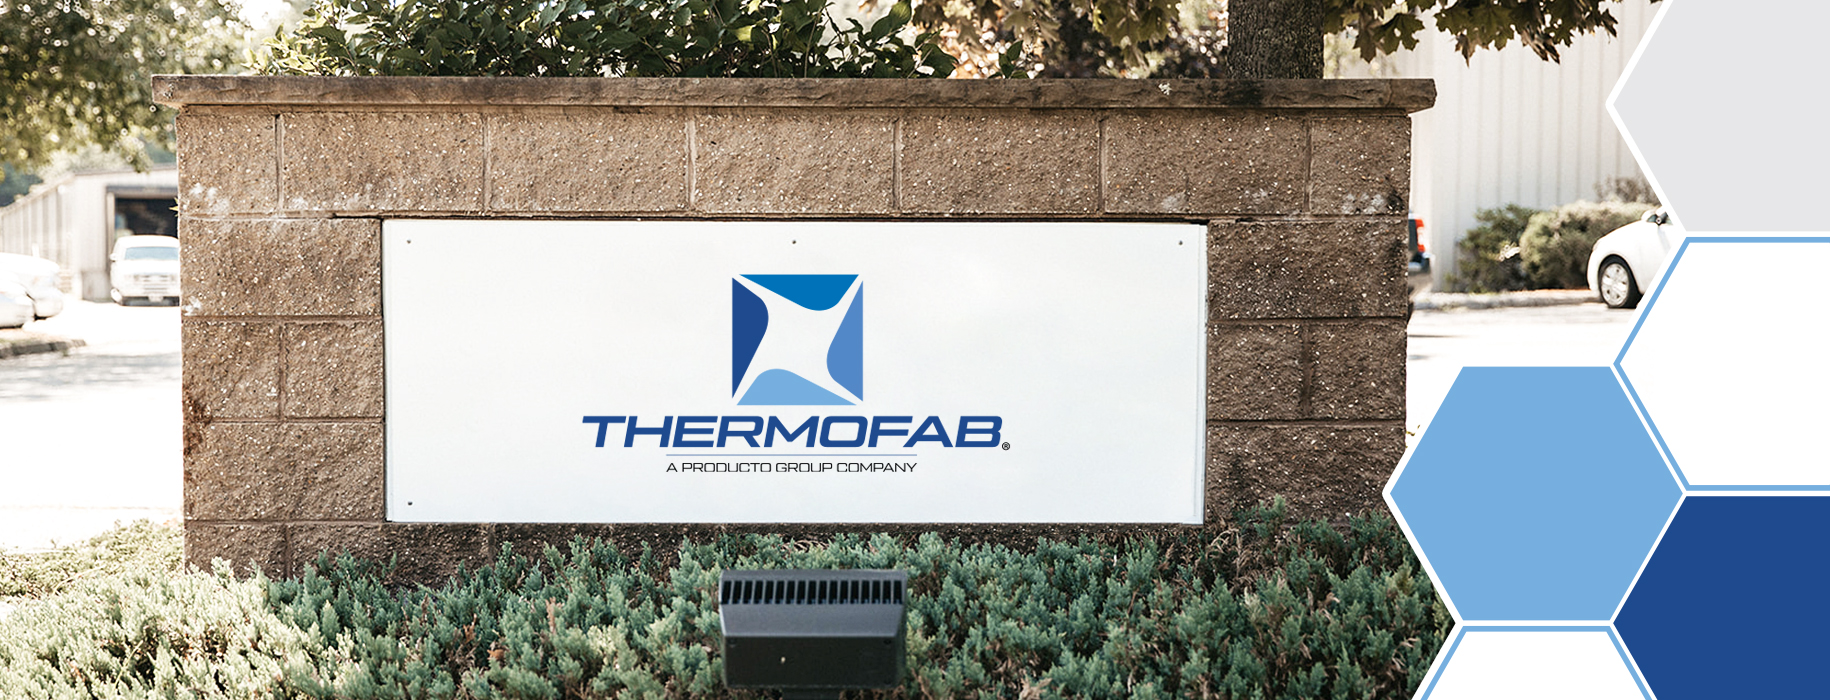 ThermoFab Business ReDesign